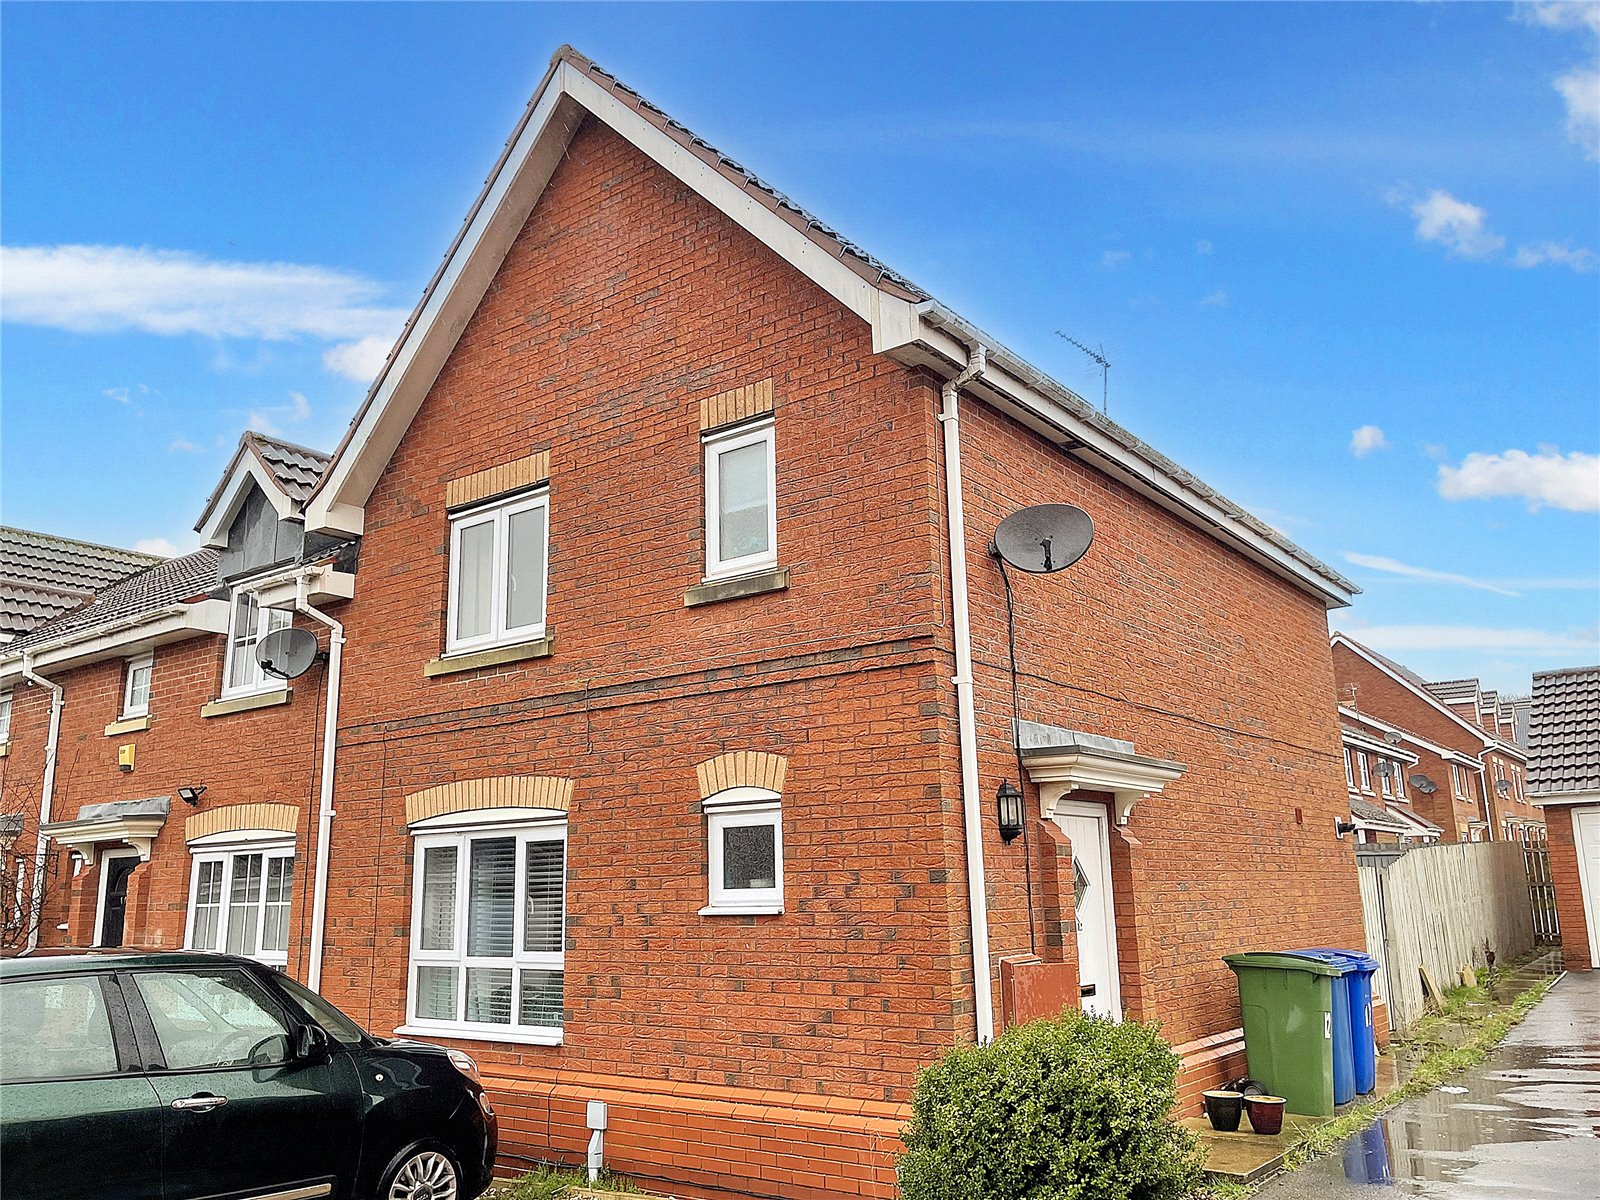 3 bed house for sale in Wheeldale Court, Bridlington - Property Image 1